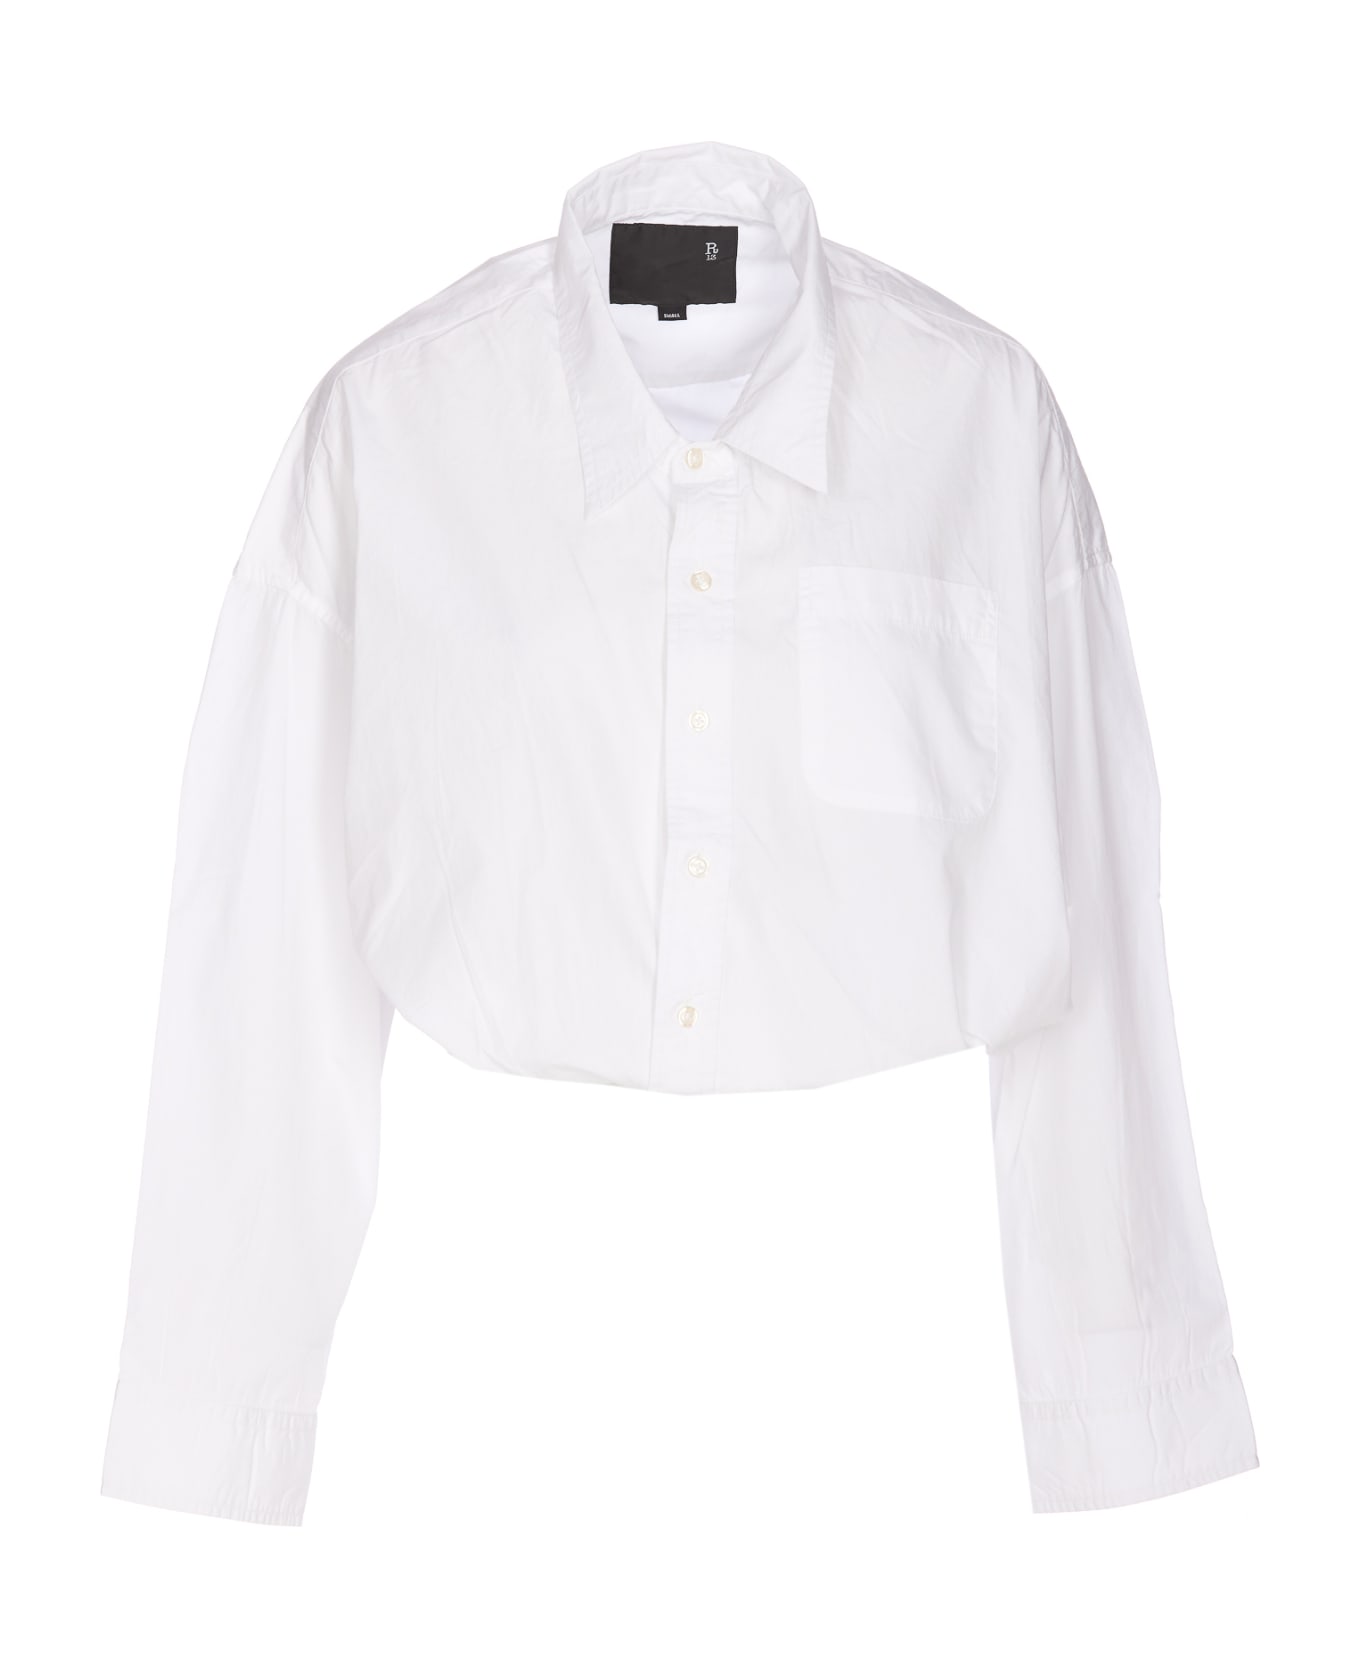 R13 Crossover Bubble Shirt - White